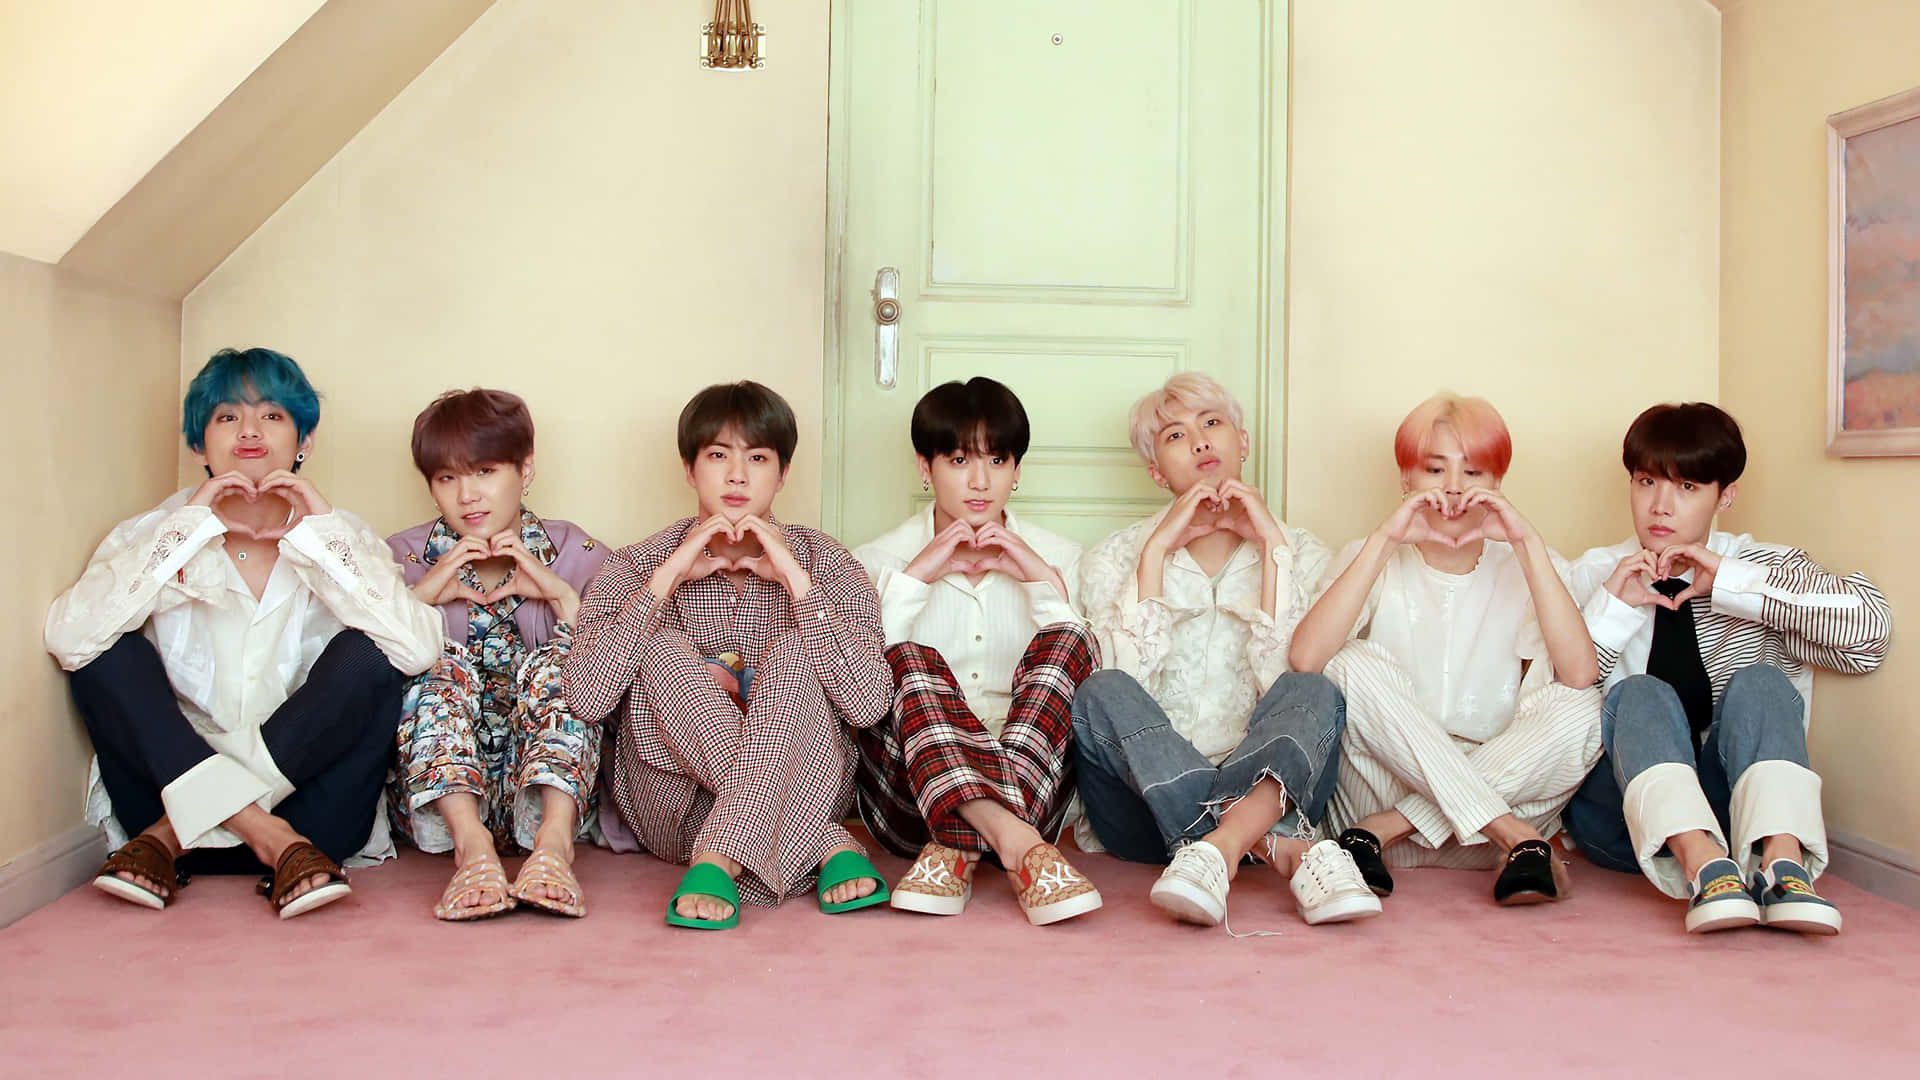 BTS Celebrates 'Map of the Soul: 7’ Album Release with a Special Makeup Line Wallpaper